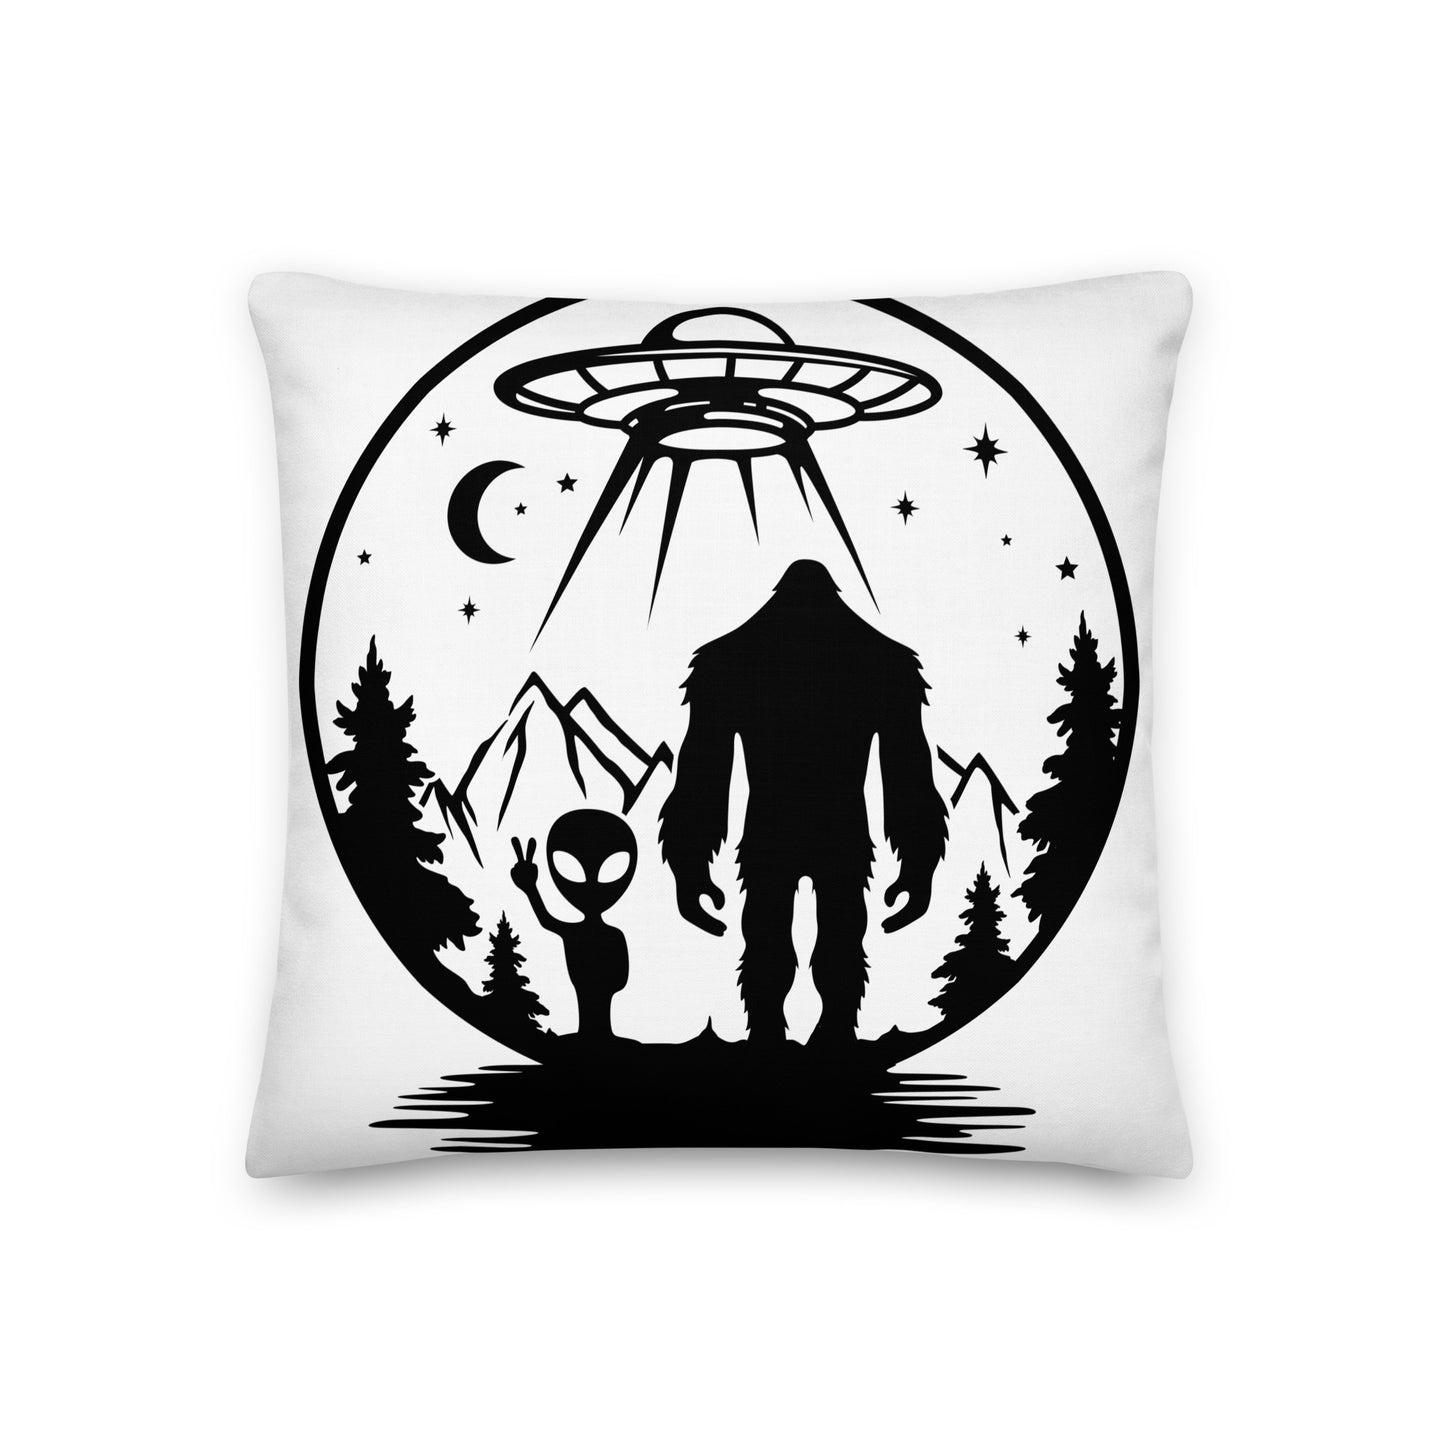 "We Are Here" Premium Pillow